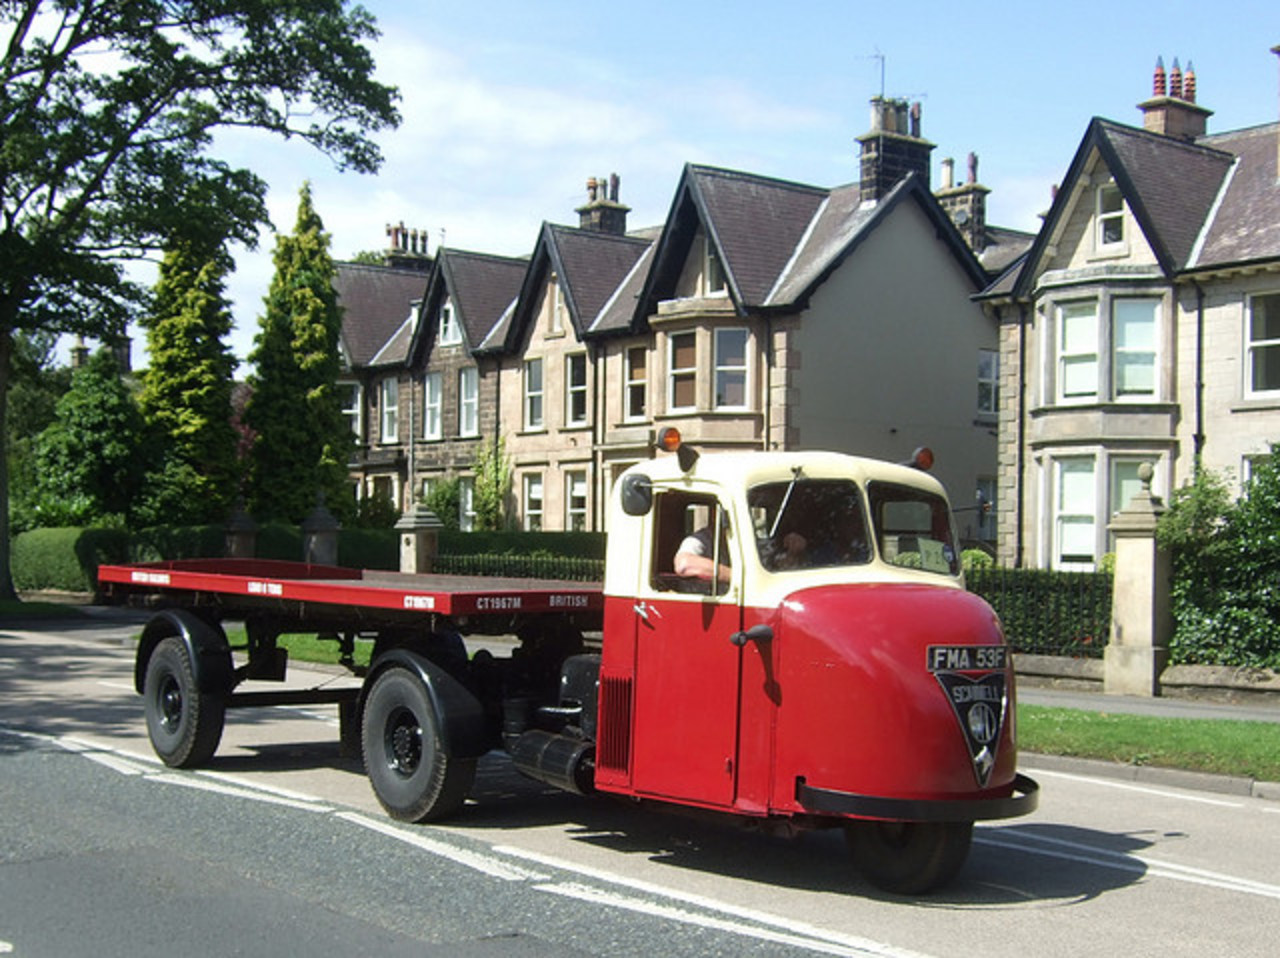 Scammell scarab